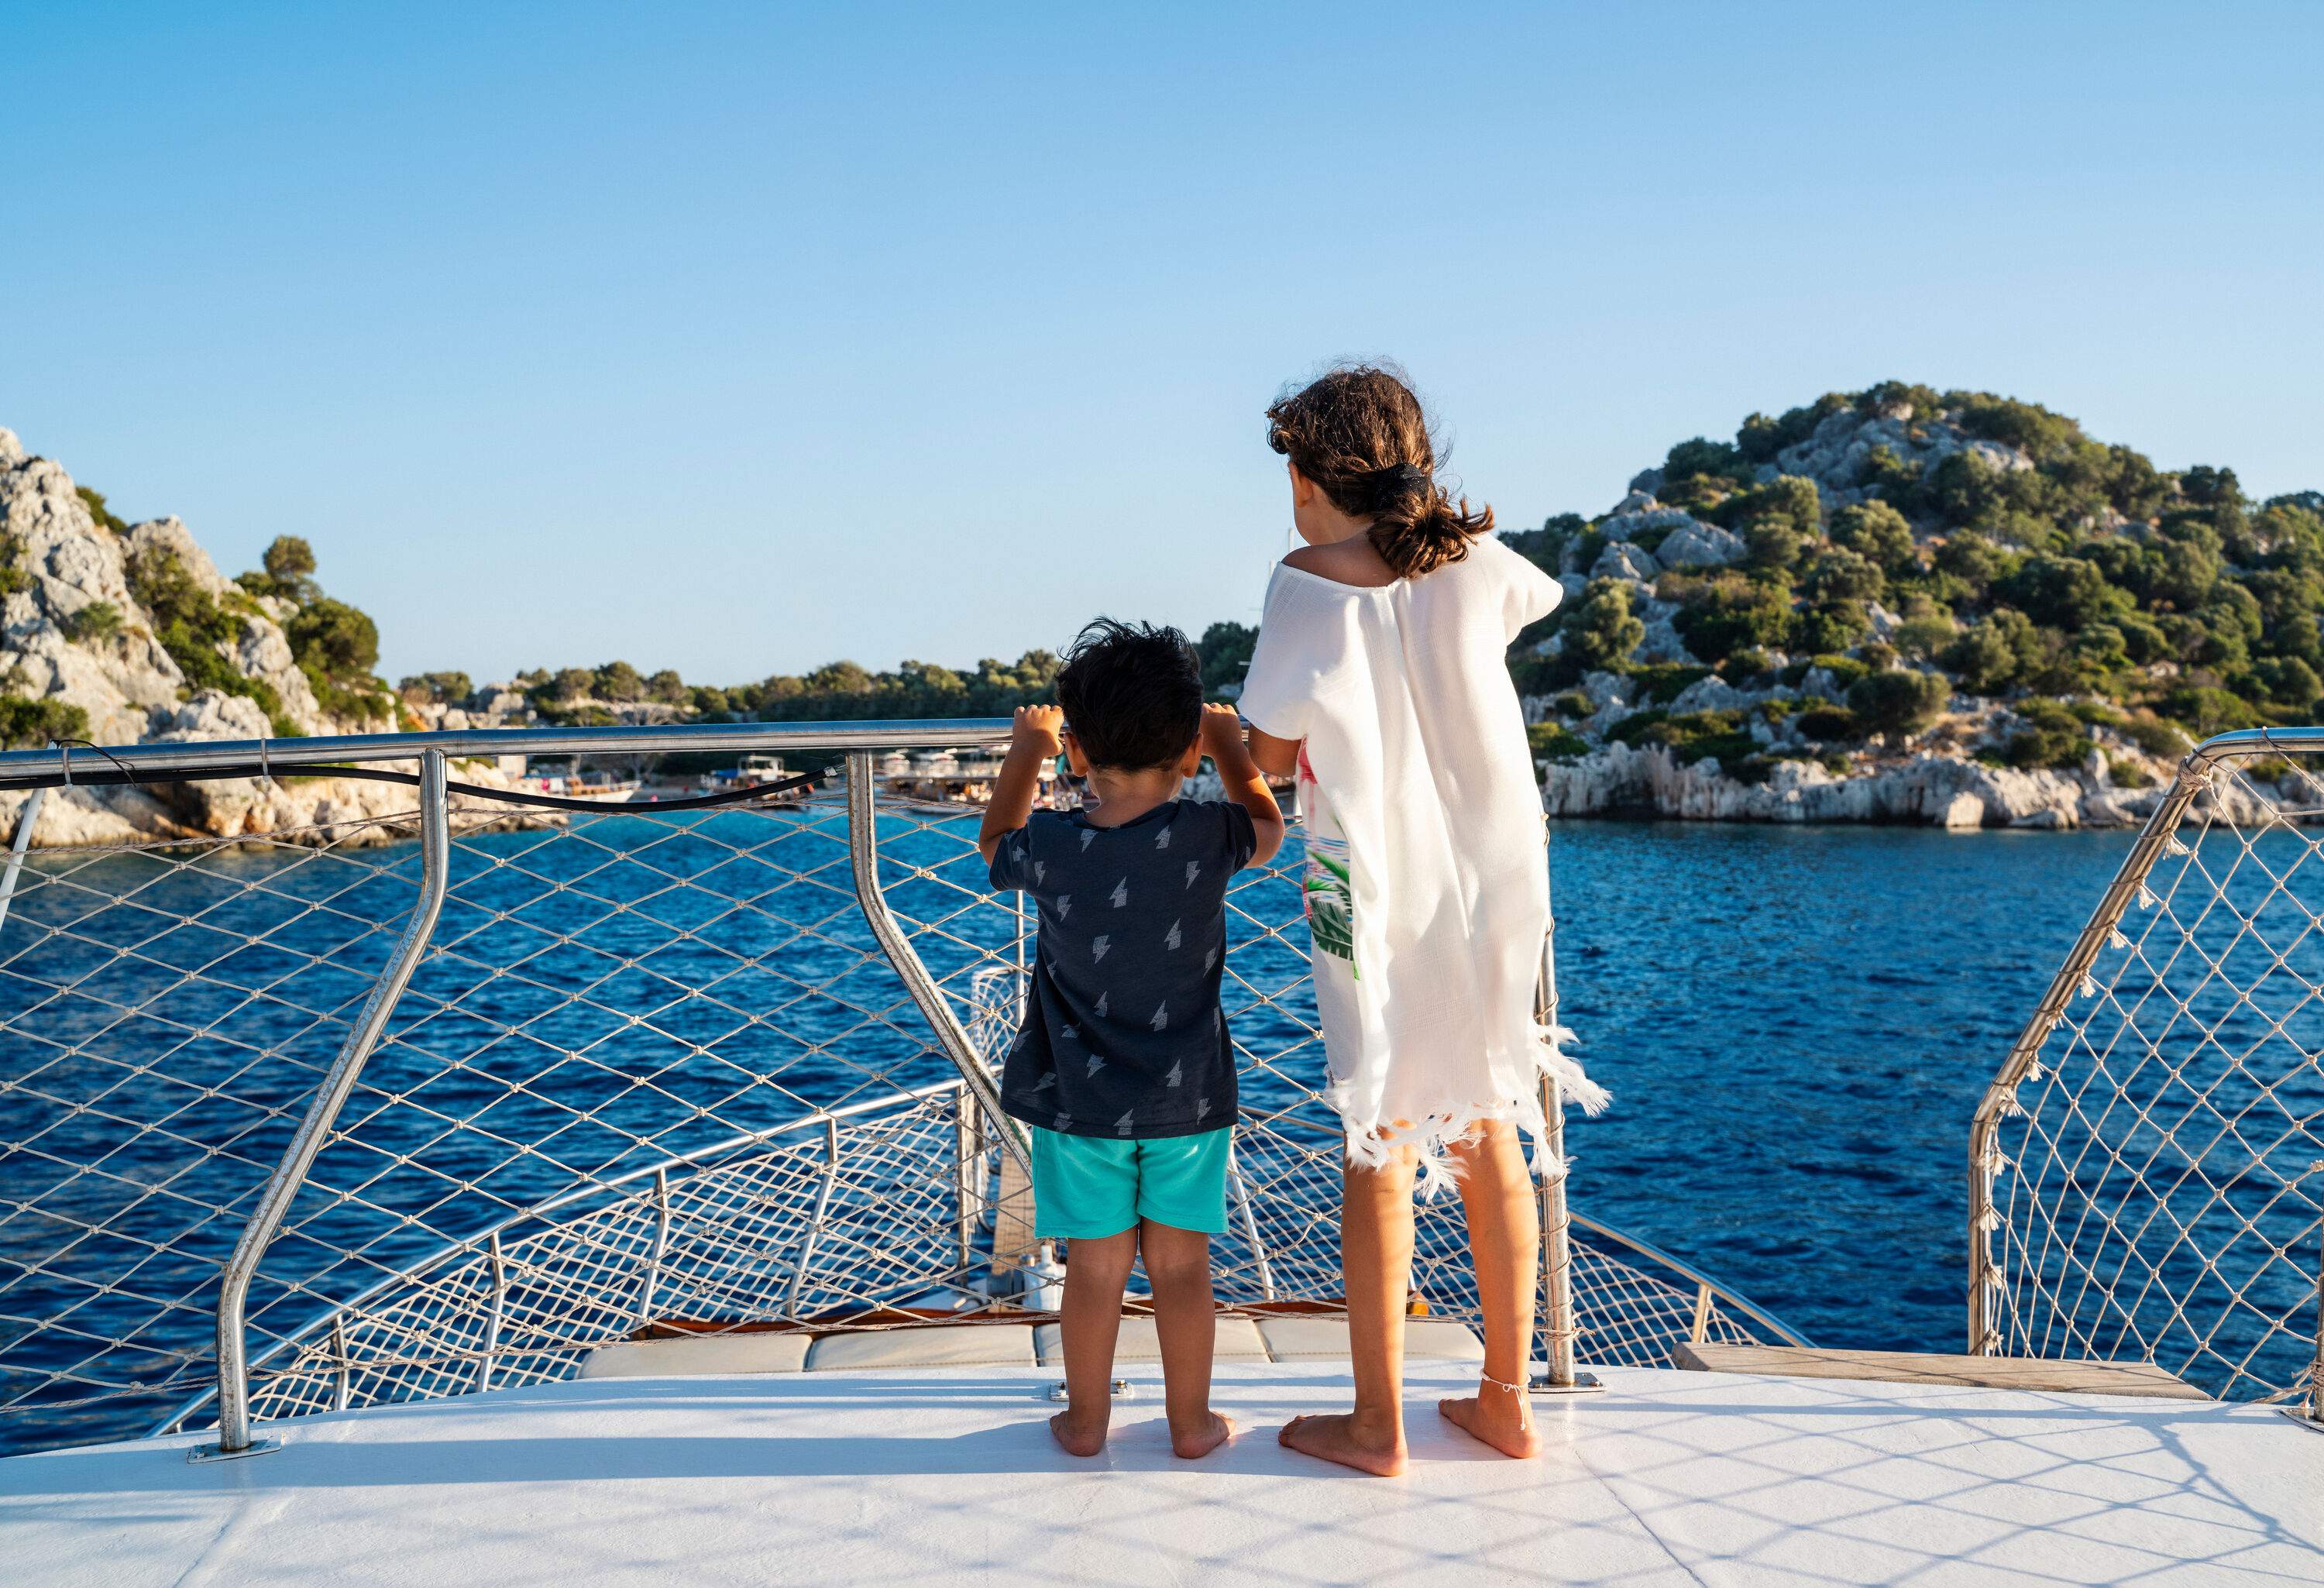 A little girl and her brother embark on an adventure on a sailboat, journeying towards an island with rugged slopes that loom in the distance.